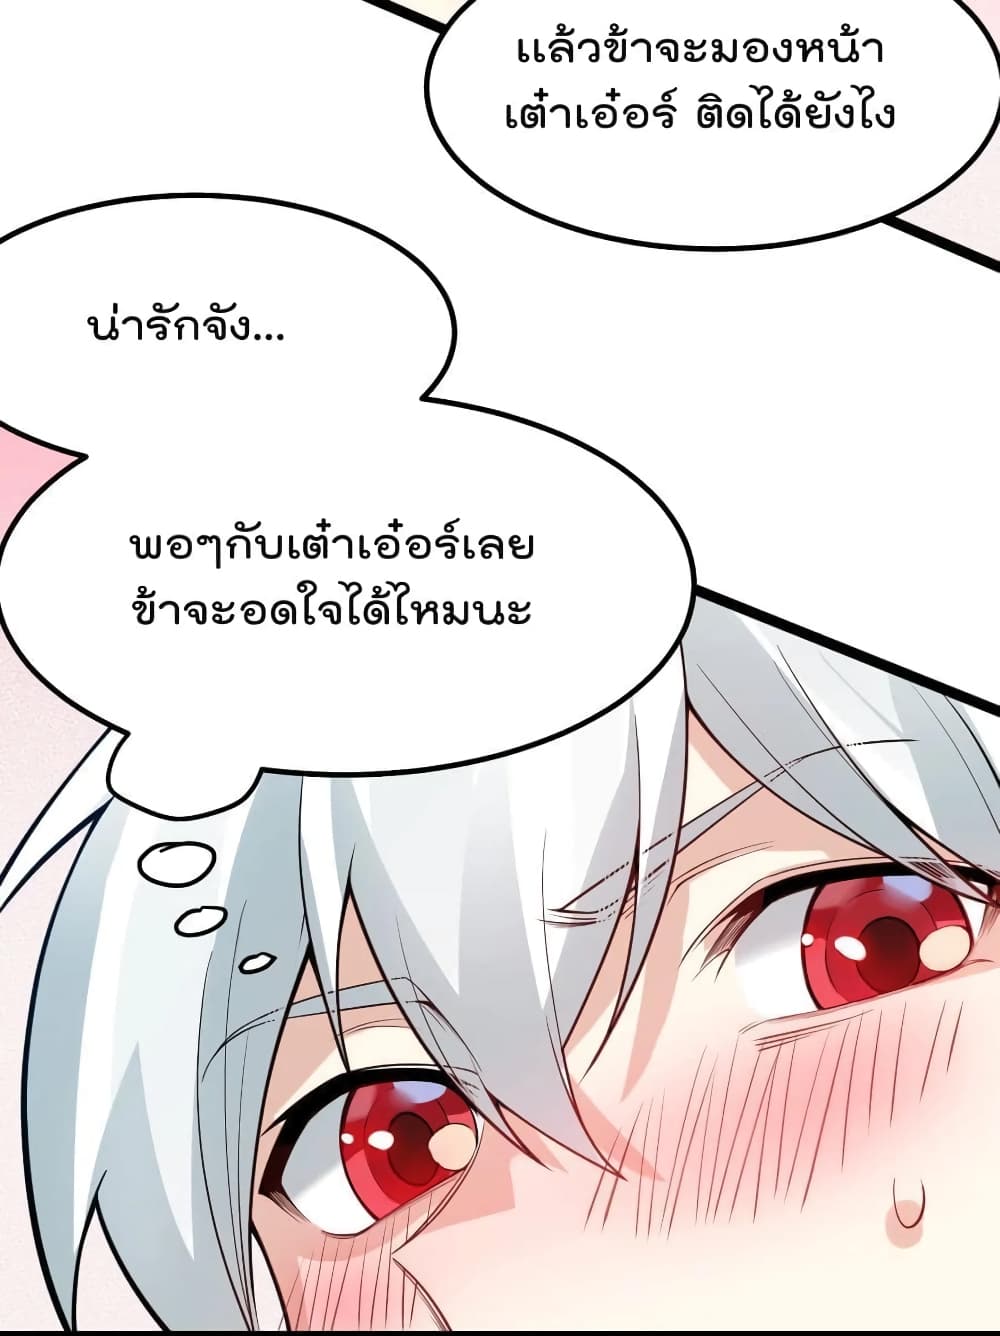 Godsian Masian from Another World ตอนที่ 102 (12)